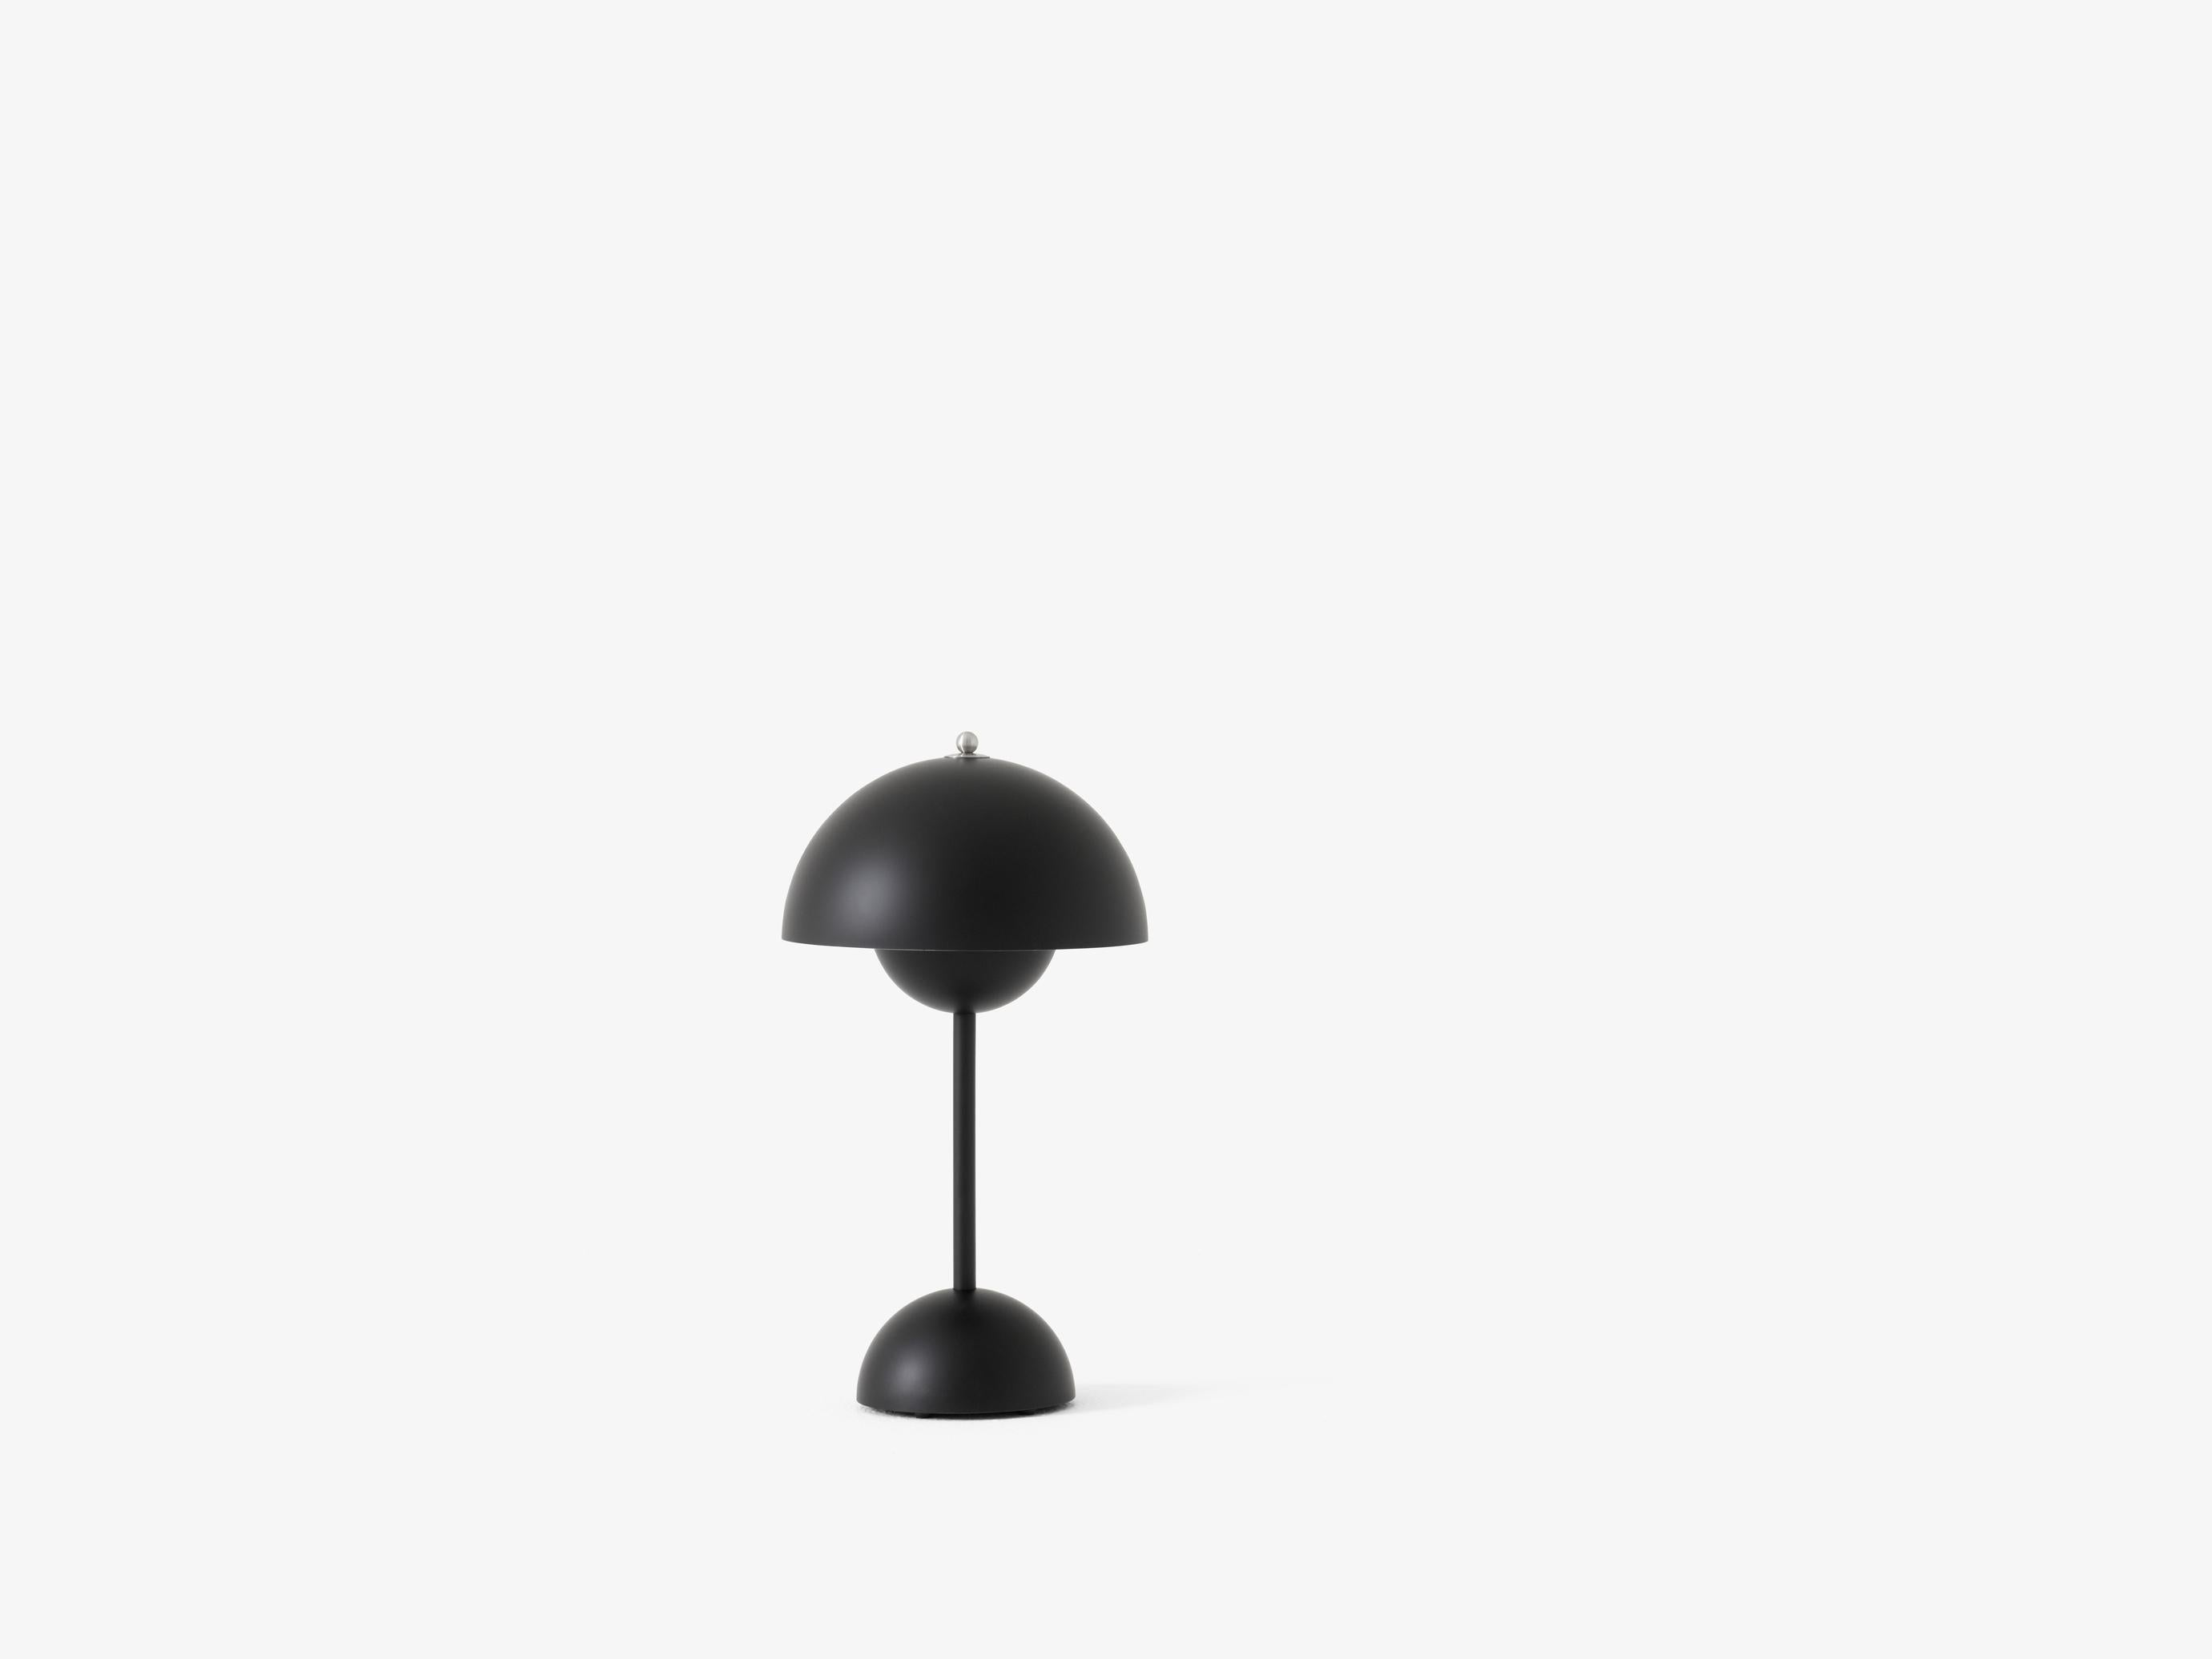 The Flowerpot, a vividly colored lamp with a rounded pendant that hangs from the semi-domed upper shade, design of Verner Panton 1968. 
Slightly smaller in size than the table lamp version, and deliberately lightweight, the portable VP9 comes